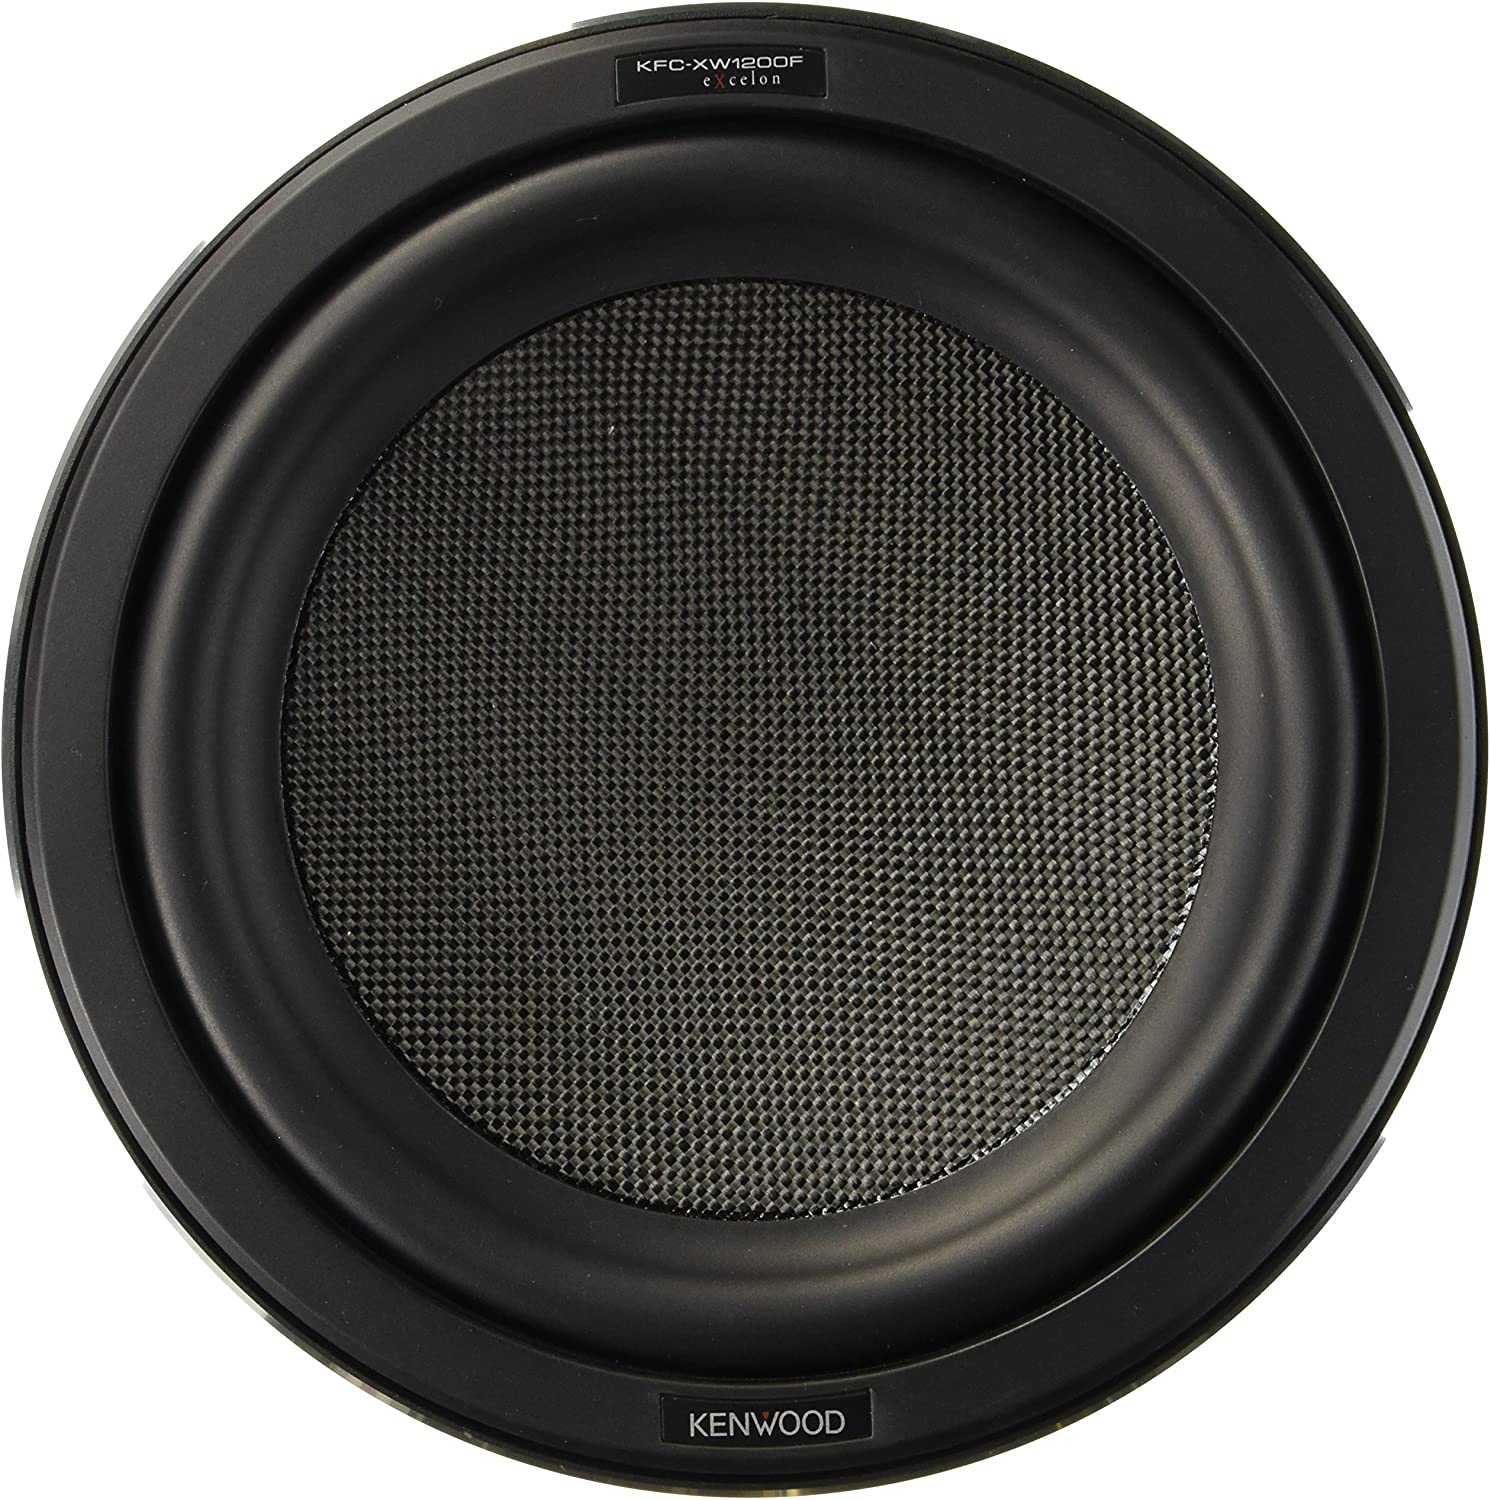 Best 12 Inch Subwoofers in the Market Kenwood KFC-XW1200F Subwoofer